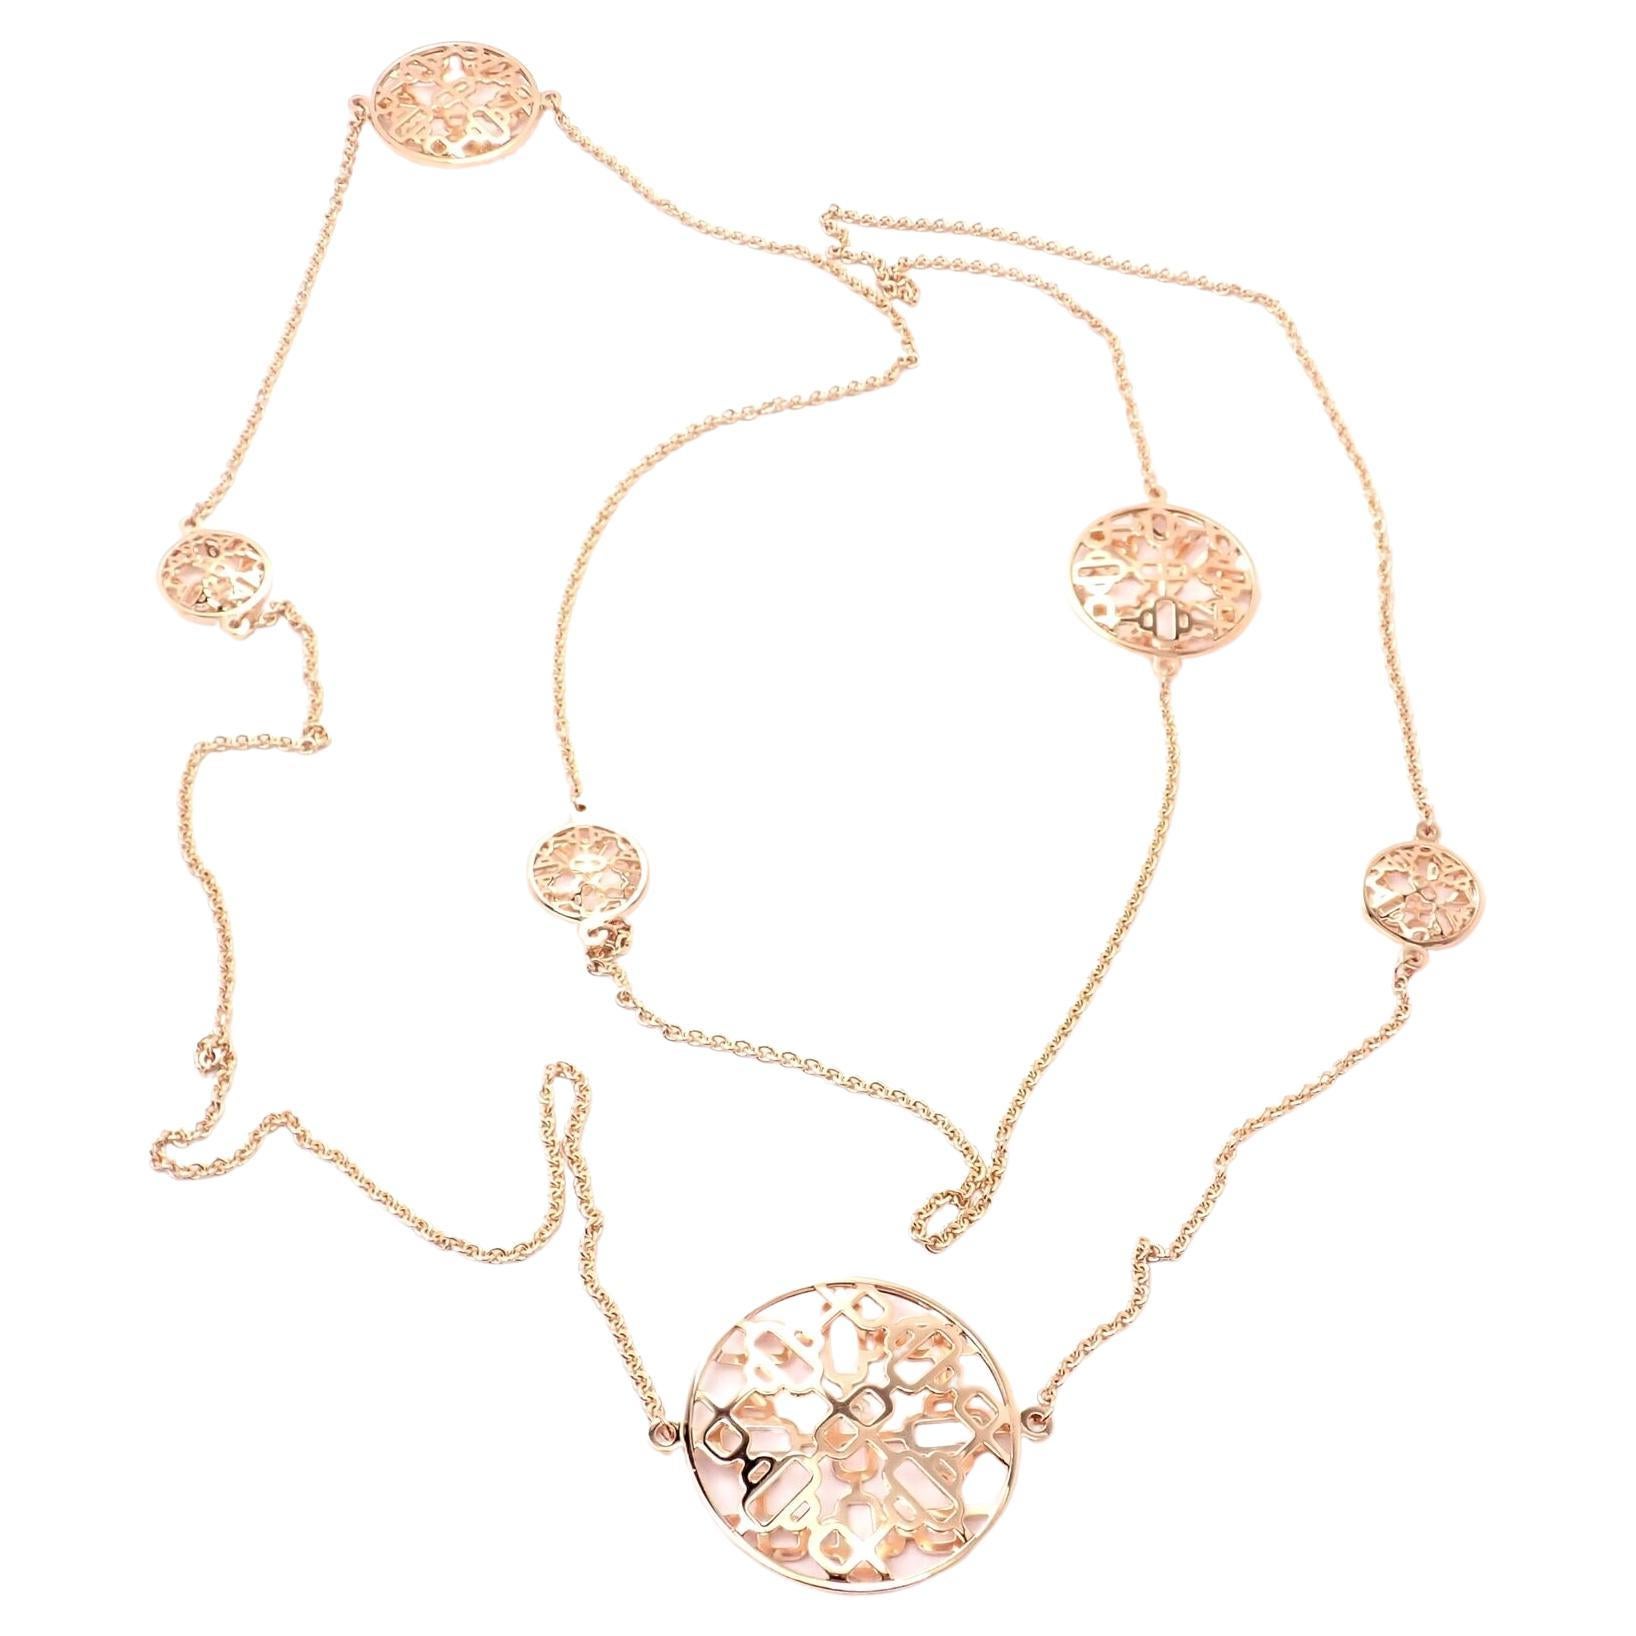 Hermes Chaine d'Ancre Passerelle Rose Gold Long Necklace